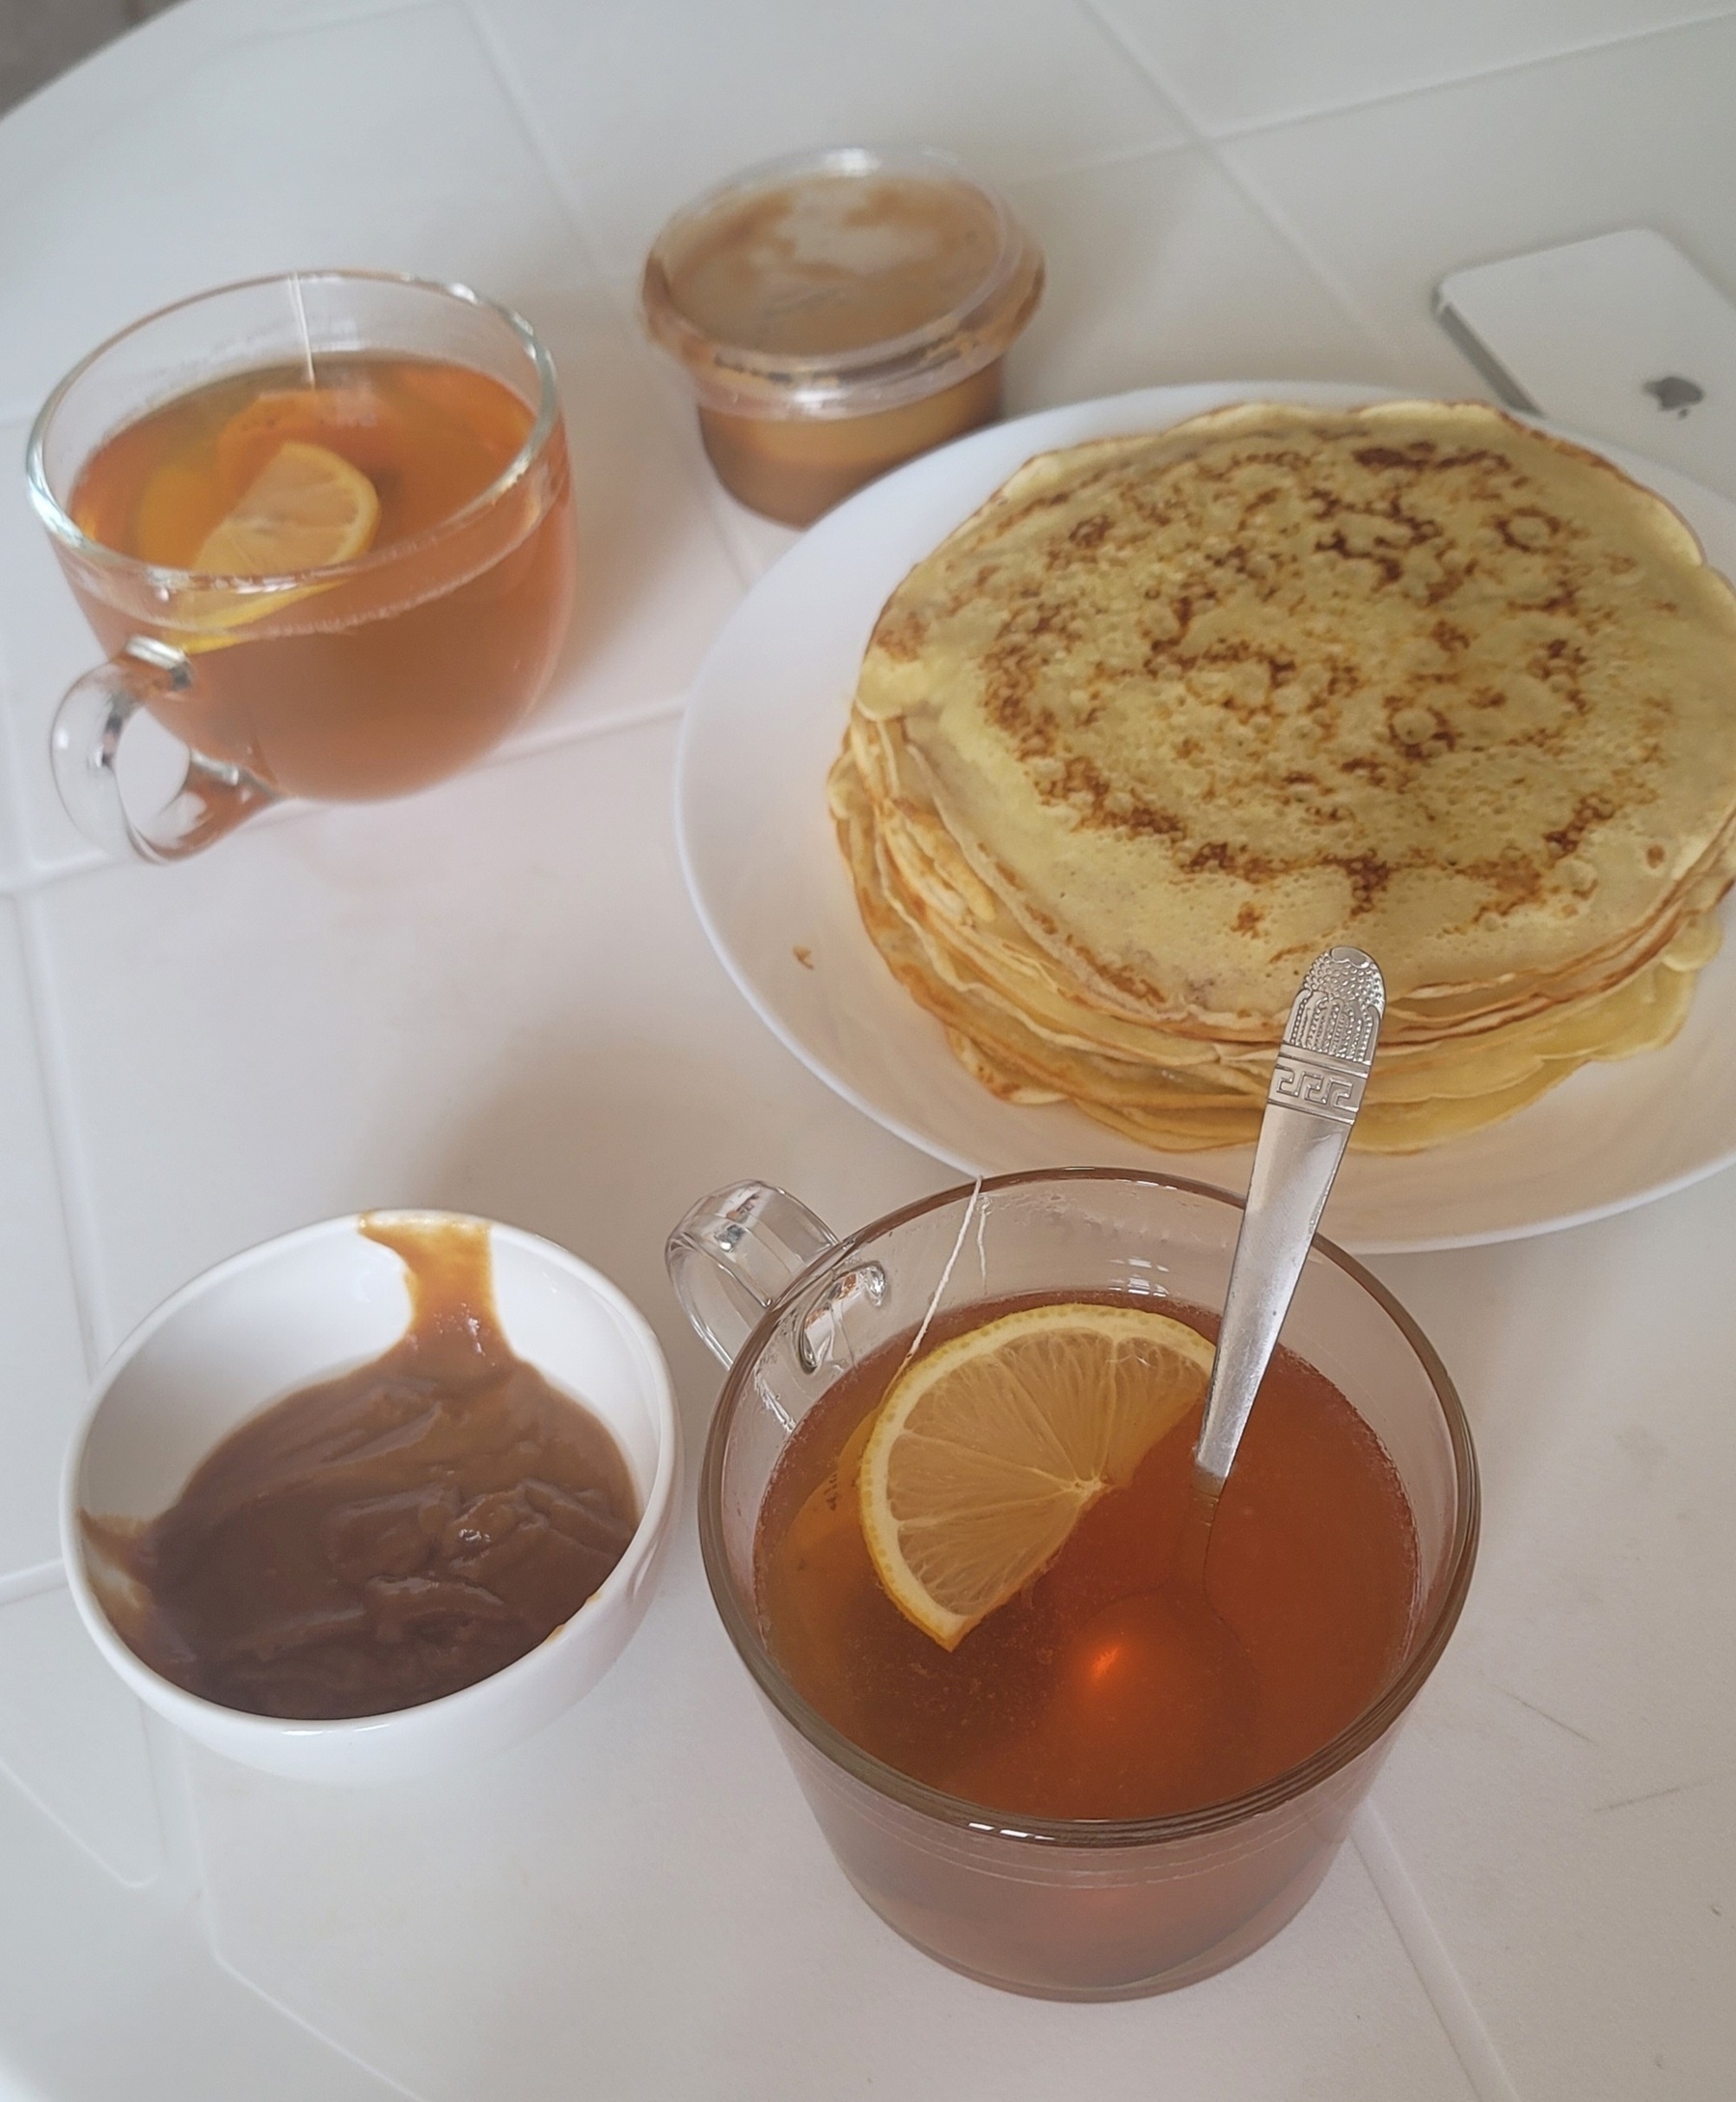 two cups of tea with lemon slices; a plate of blini (Russian pancakes) and a bowl with сүмөлөк, a brown pudding-like dessert (also a plastic container with сүмөлөк)